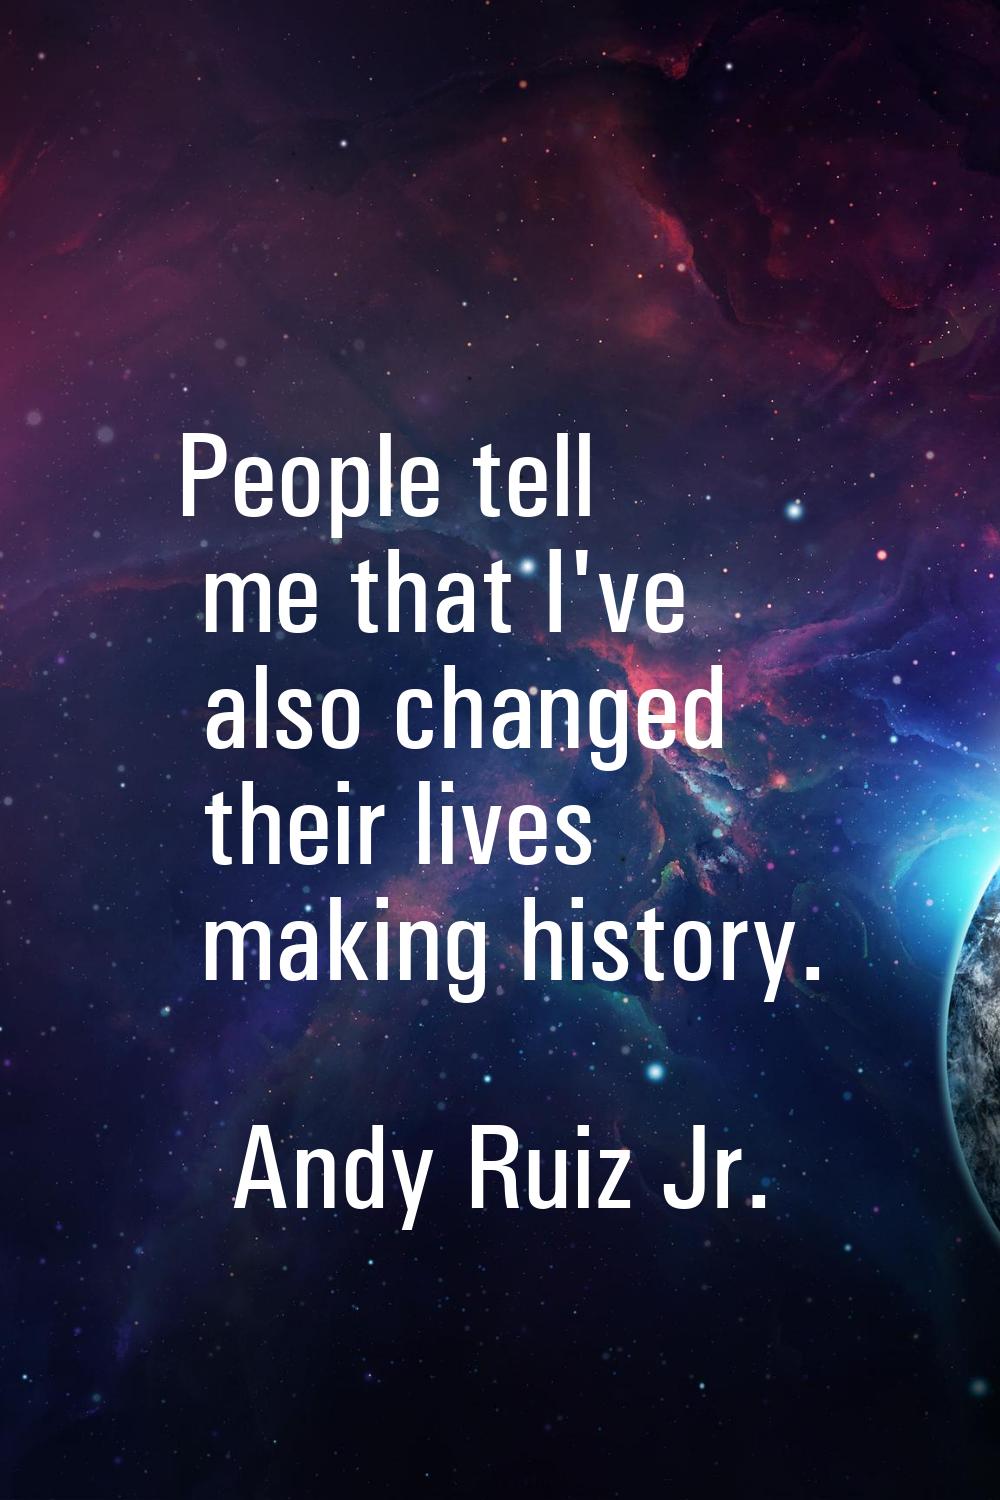 People tell me that I've also changed their lives making history.